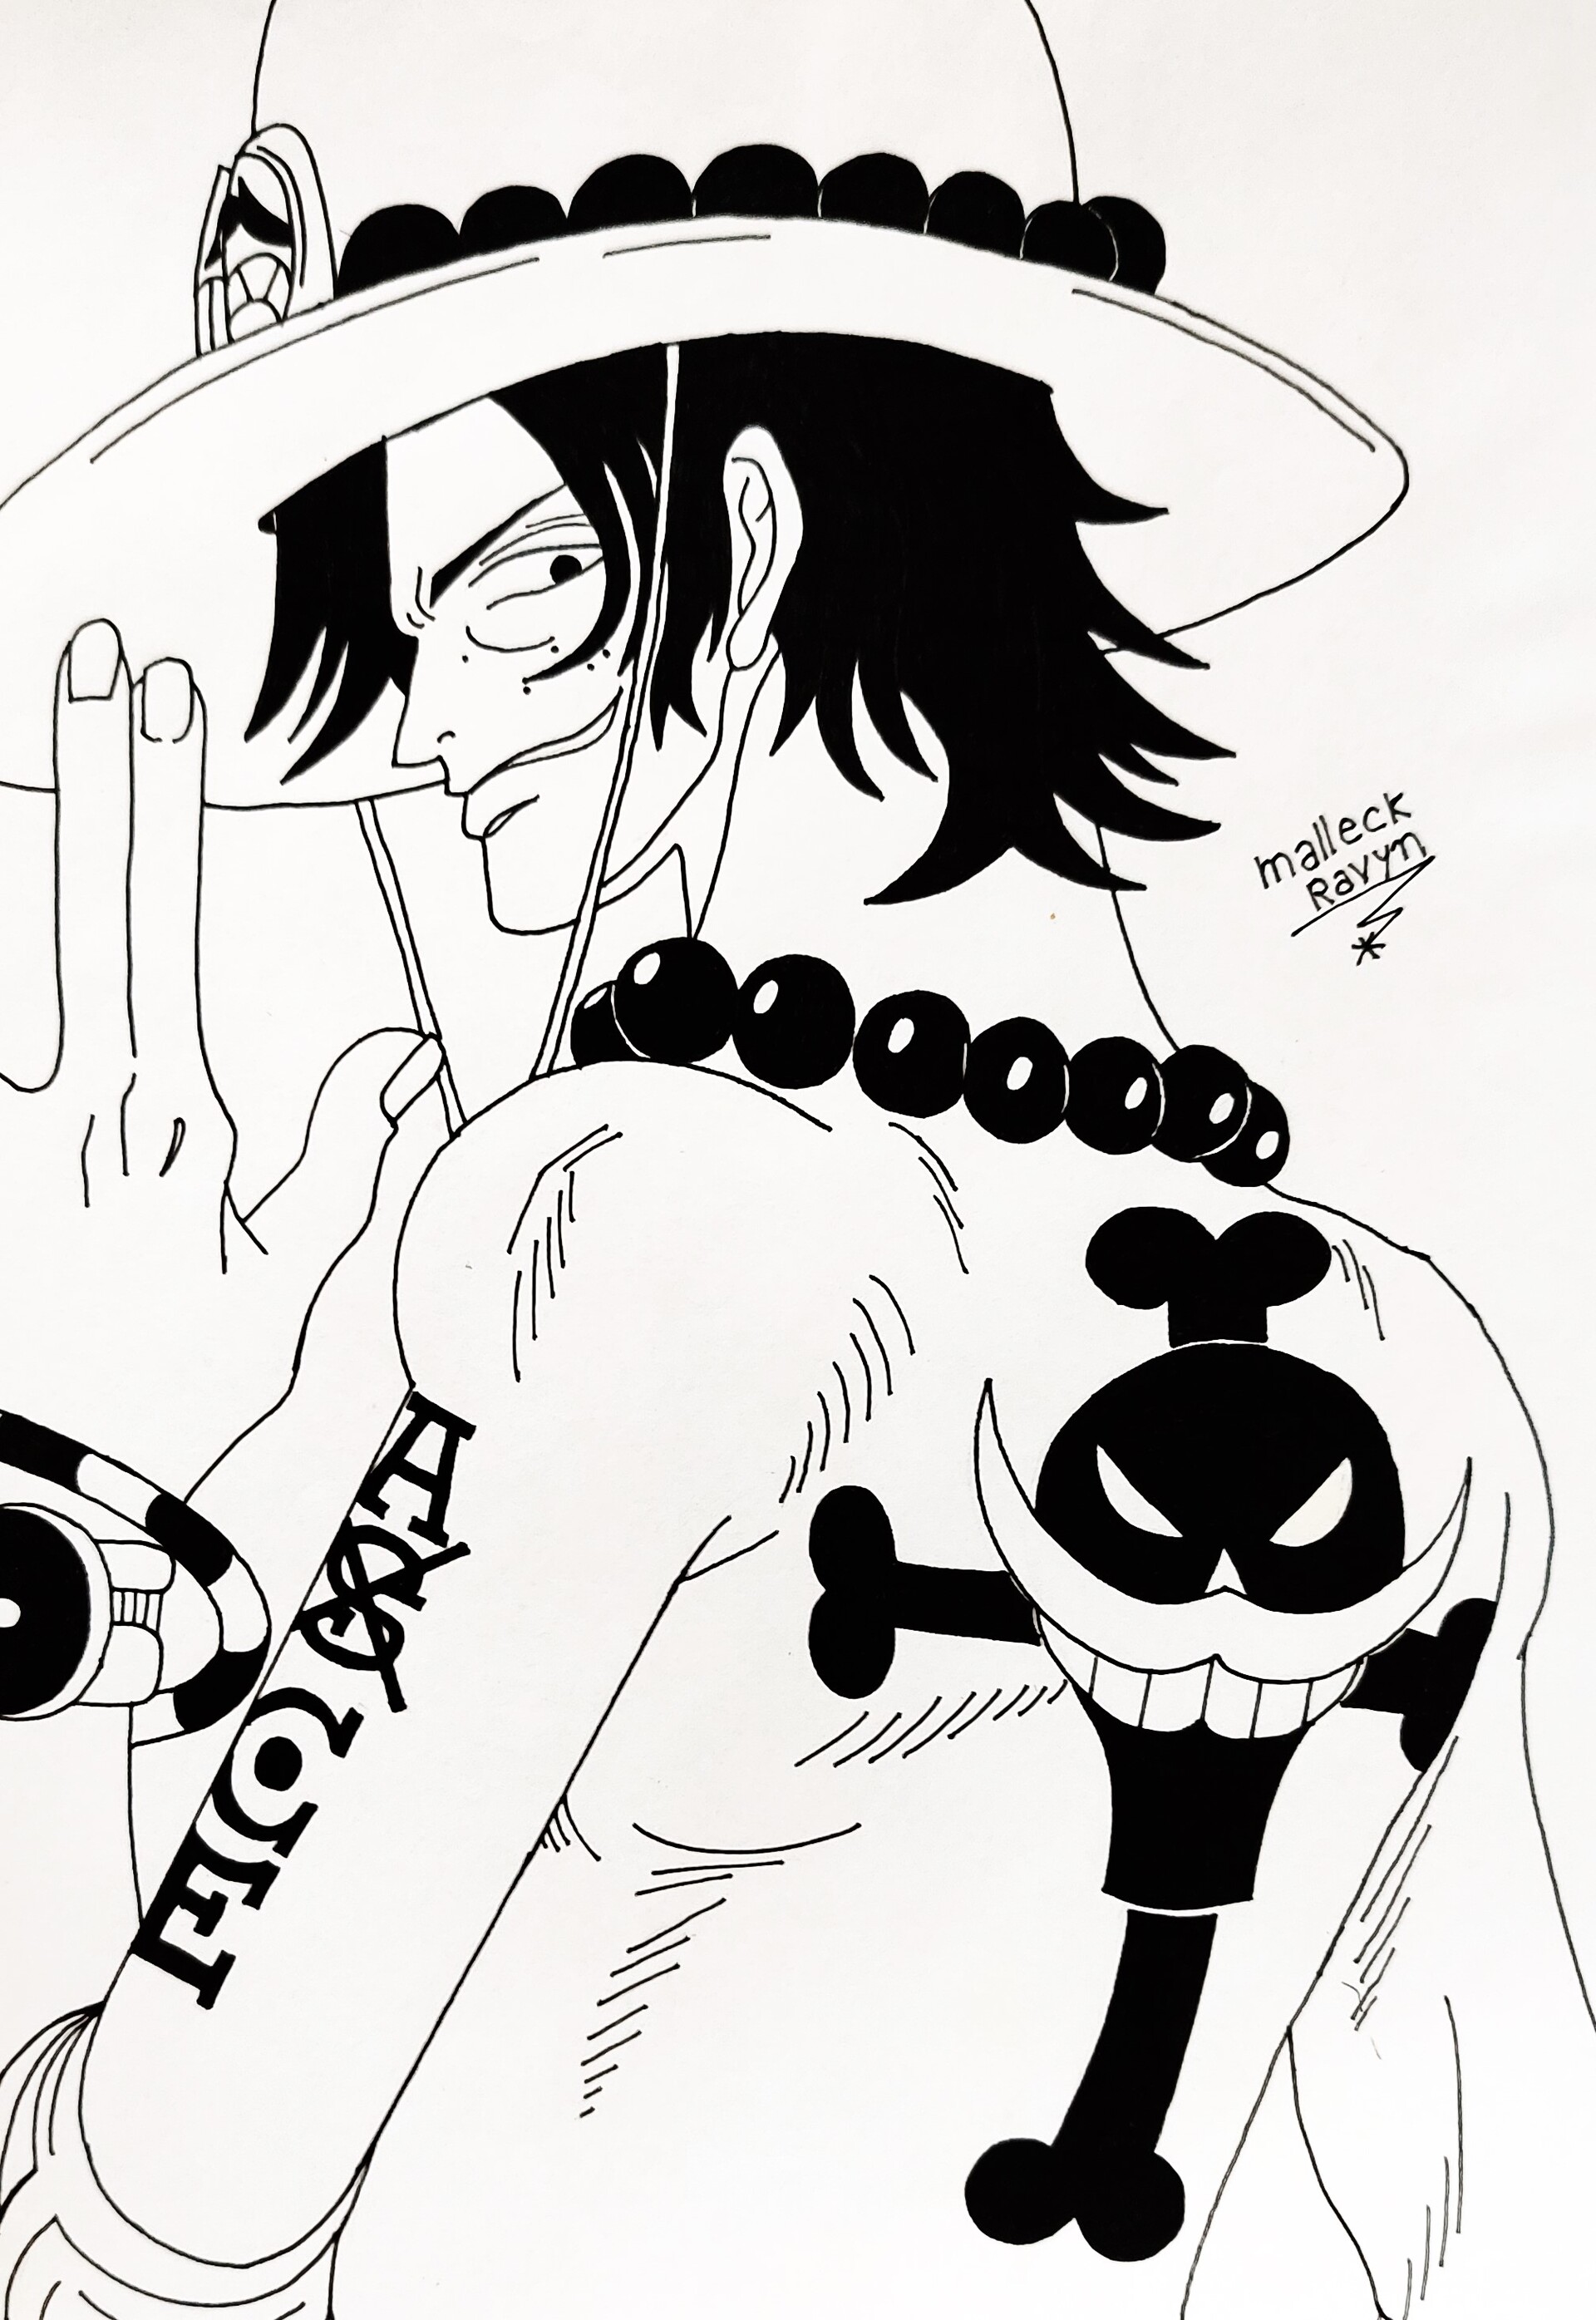 Ace One Piece Icons  Personagens de anime, Anime, Animes wallpapers